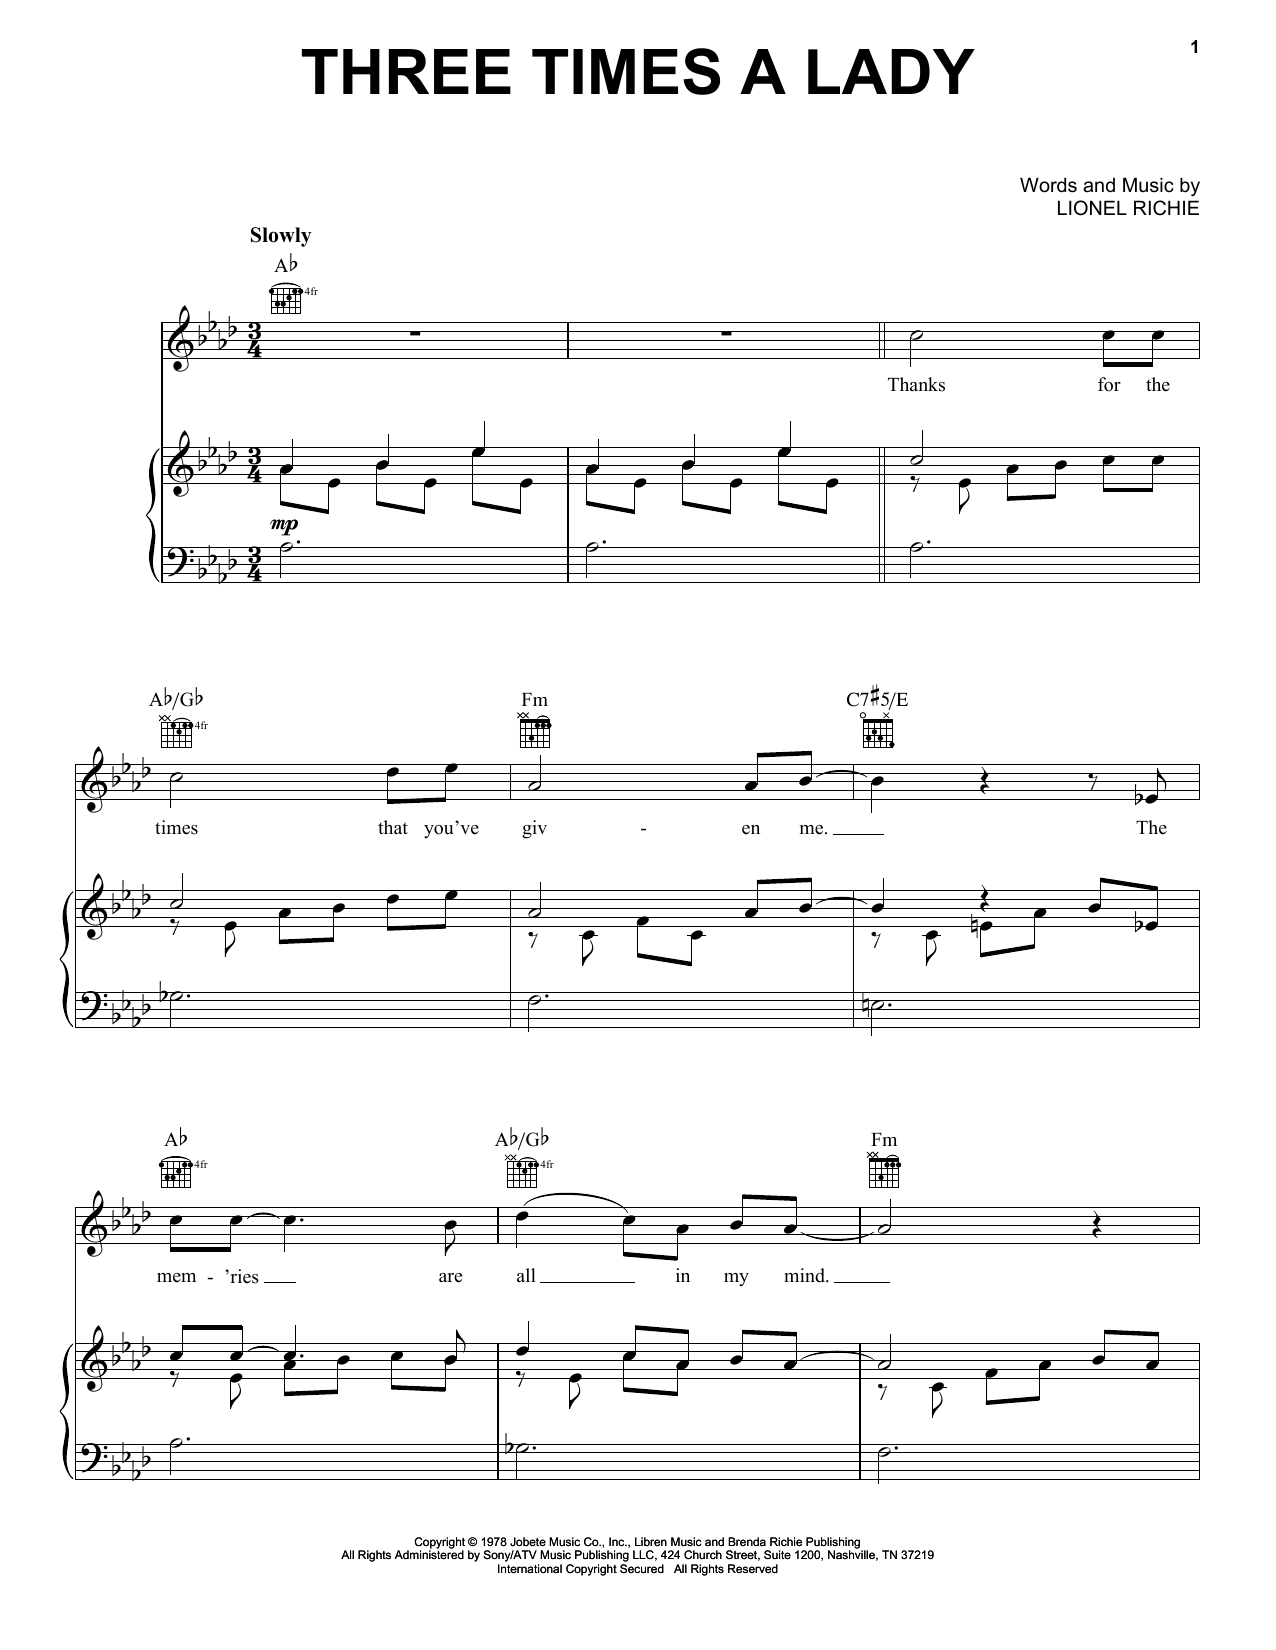 Commodores 'Nightshift' Sheet Music Notes, Chords, Score. Download  Printable PDF Score. in 2023